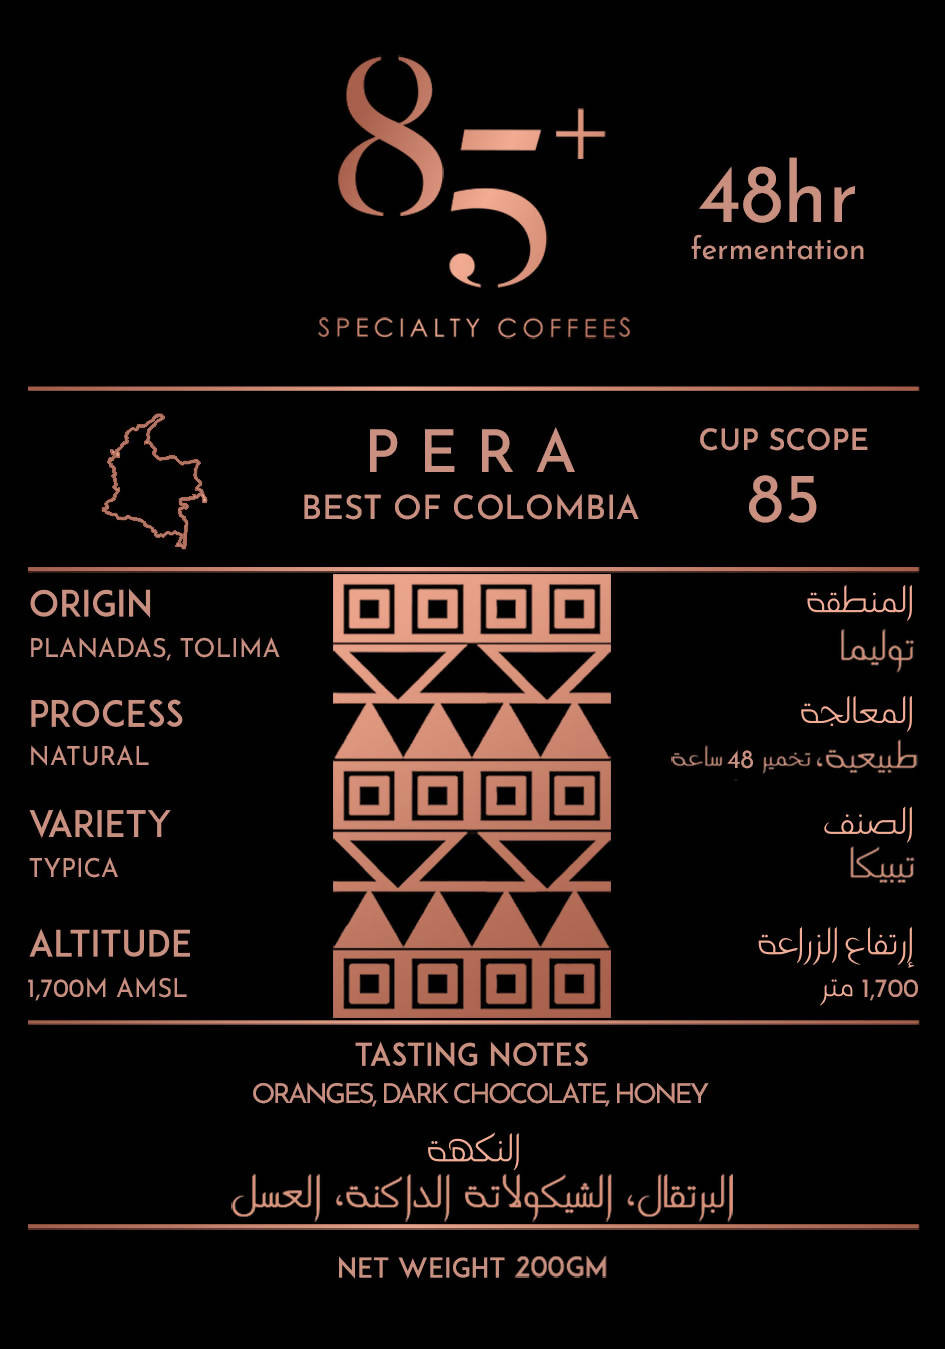 Colombia - PERA | Cup Score 85 - BeanBurds 85+ Specialty Coffee 200G / Whole Beans